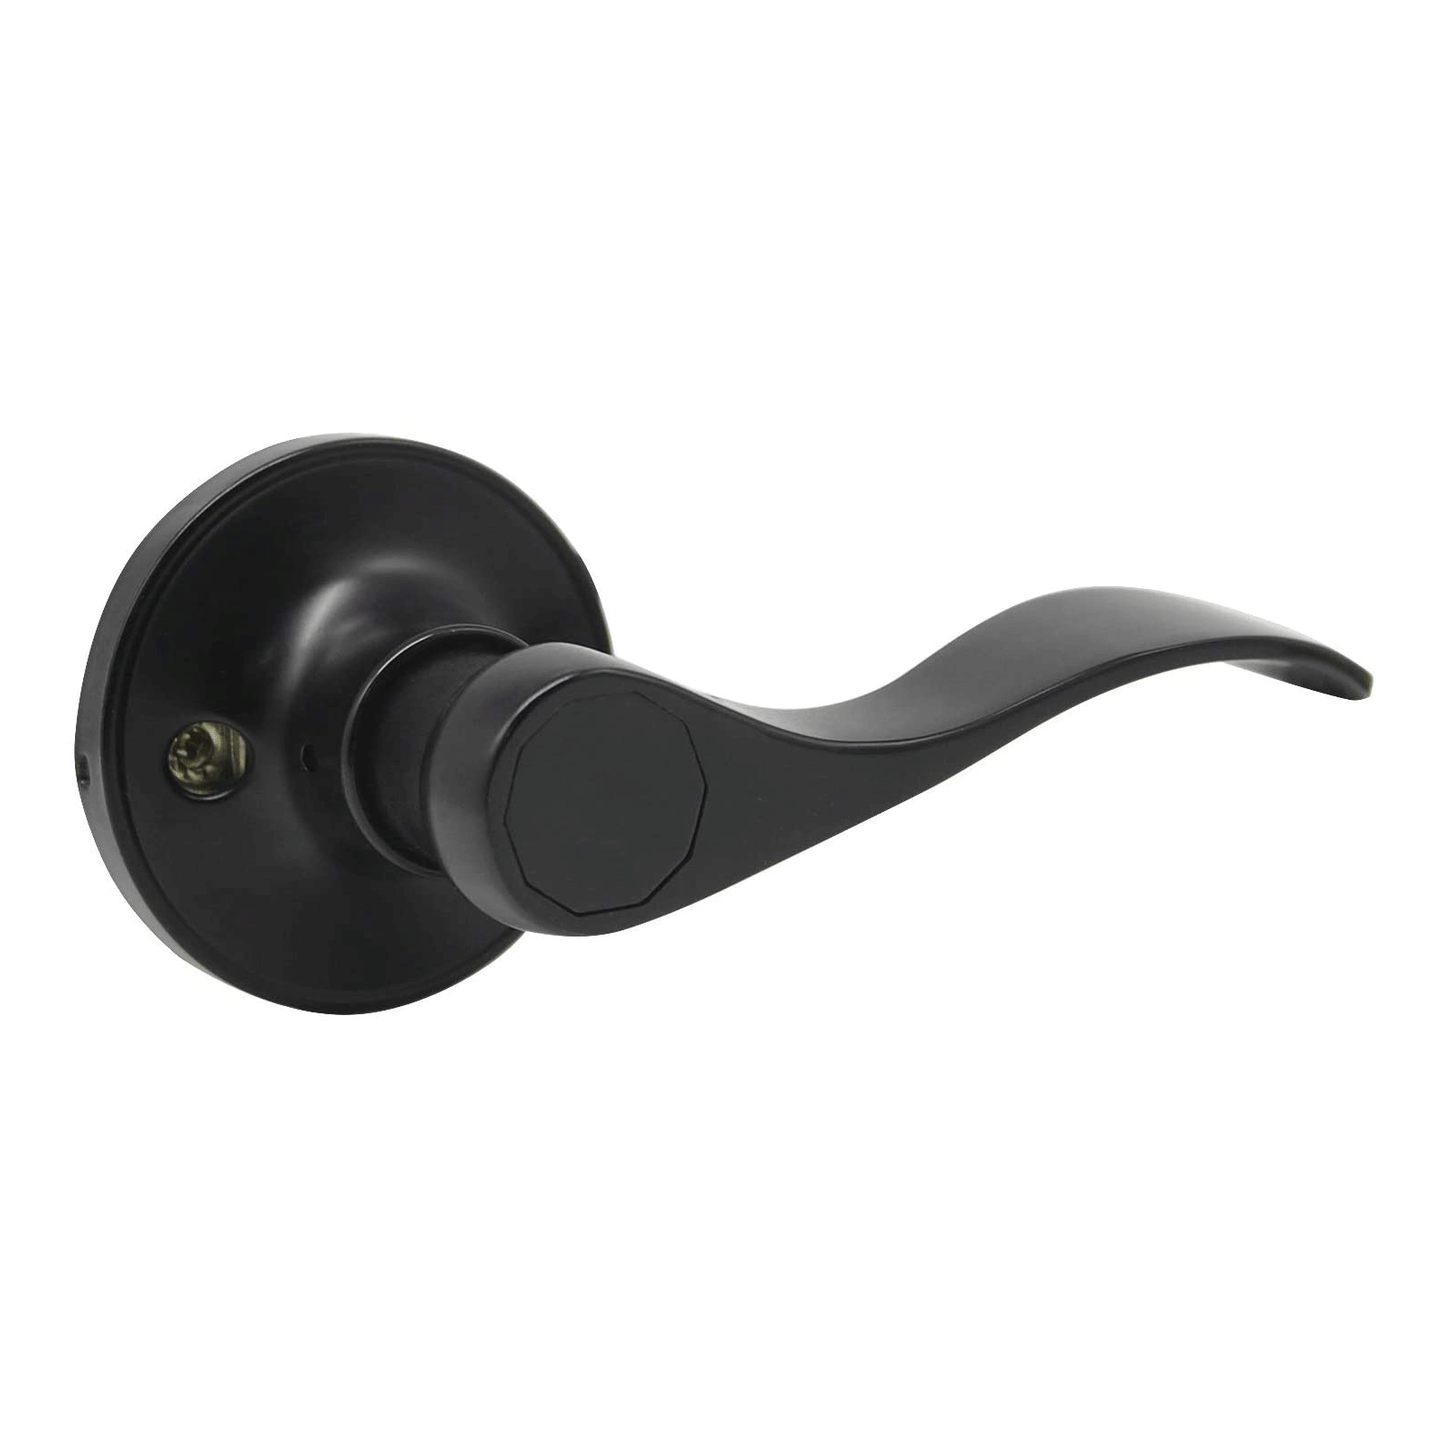 Black Door Handles Wave Style Levers, Entry Keyed/Privacy Lock/Passage/Dummy Function DL12061BK - Probrico